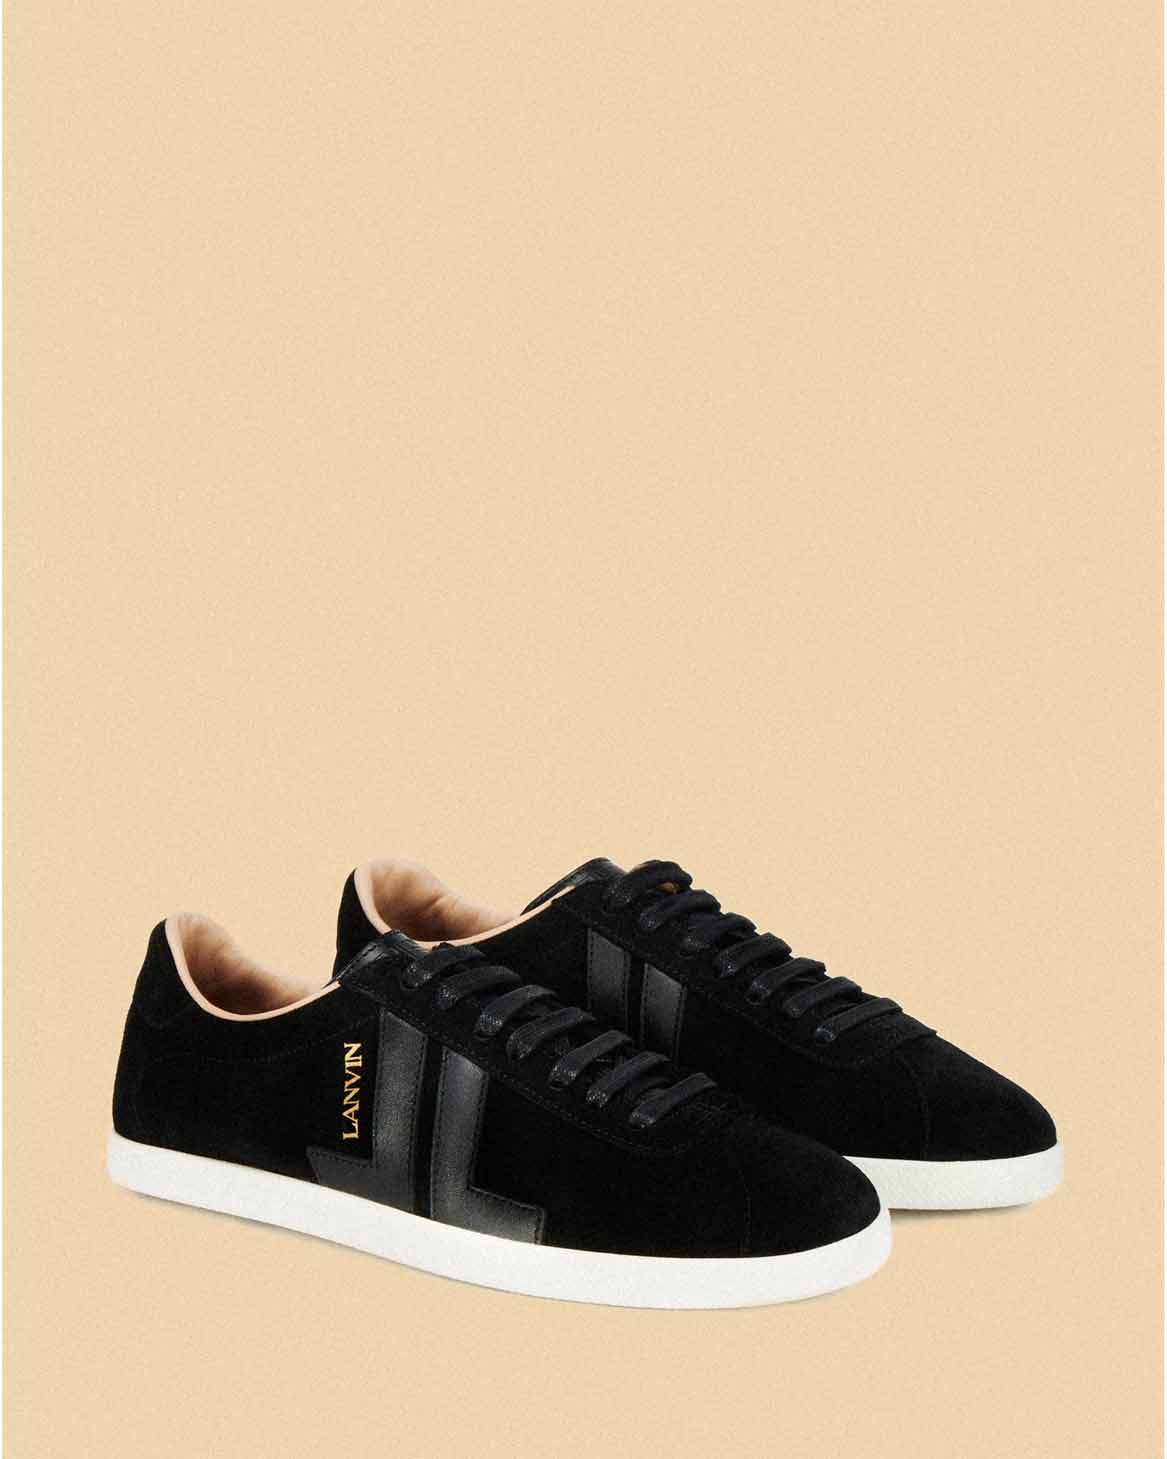 Lanvin Paris - Official Website - Sneakers Collection for and women